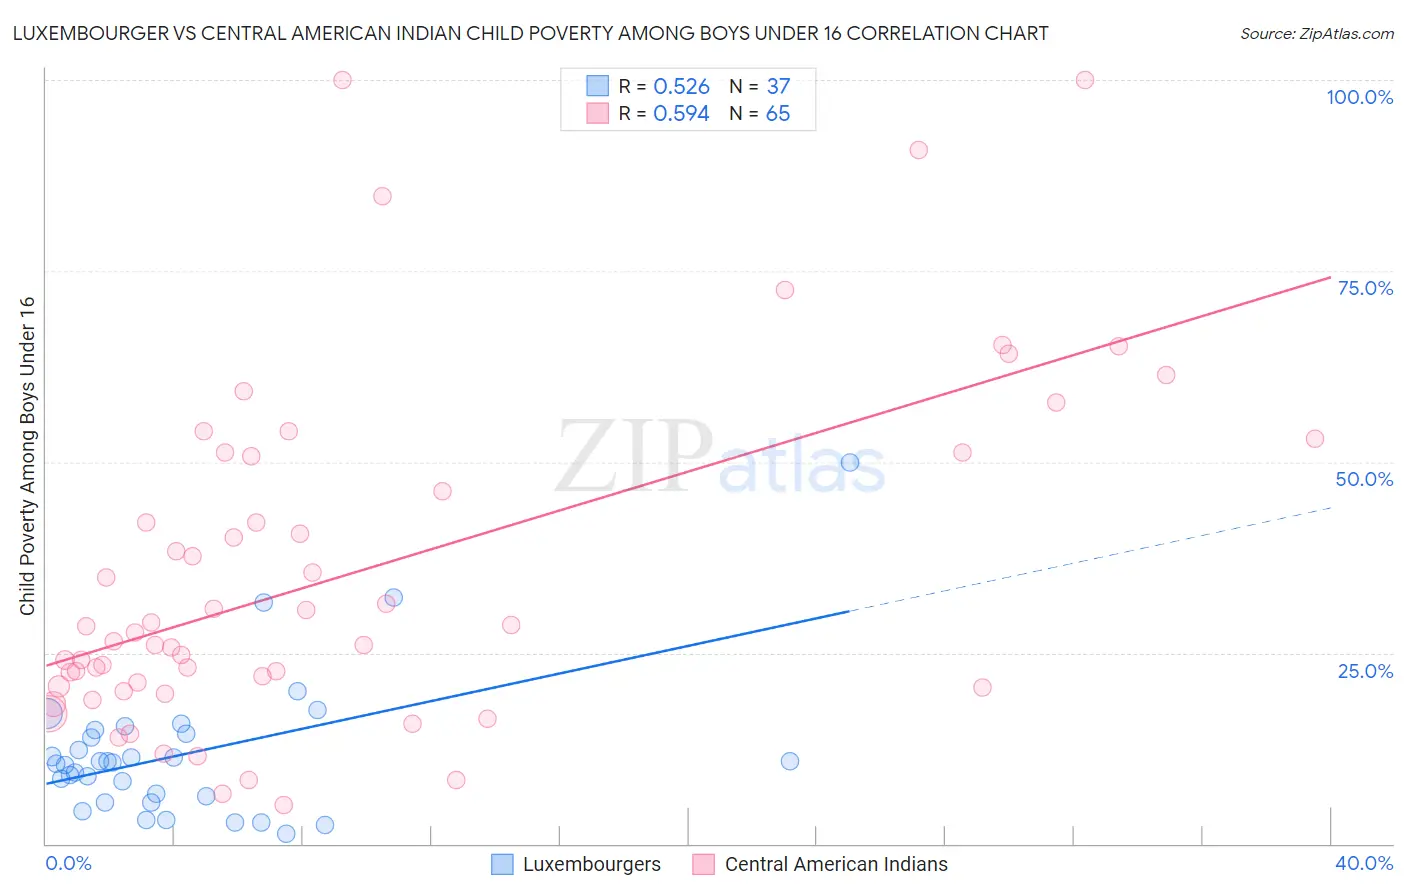 Luxembourger vs Central American Indian Child Poverty Among Boys Under 16